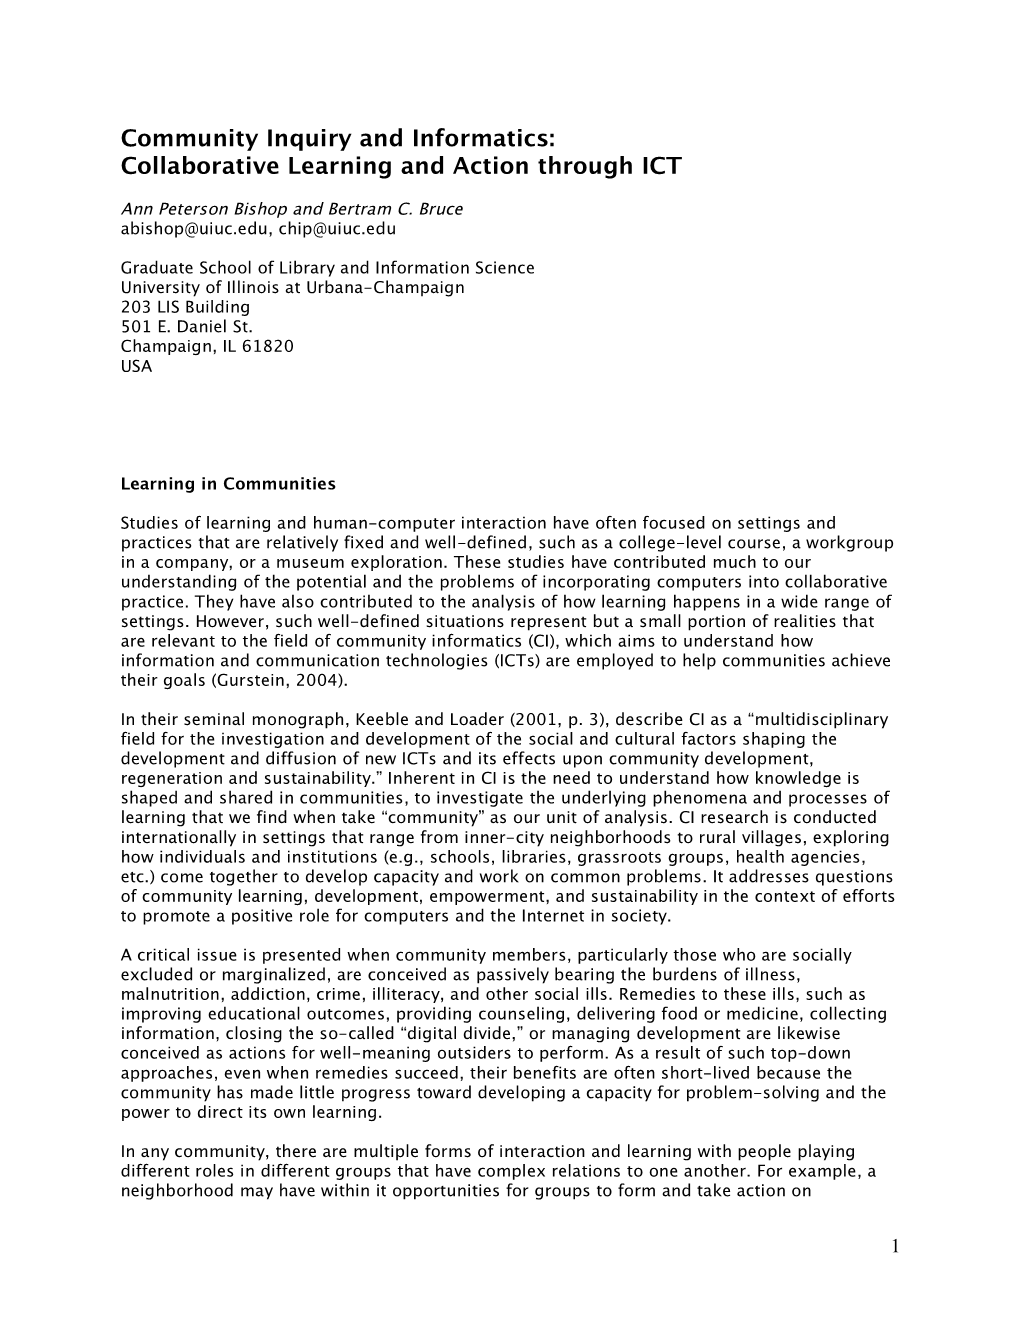 Community Inquiry and Informatics: Collaborative Learning and Action Through ICT